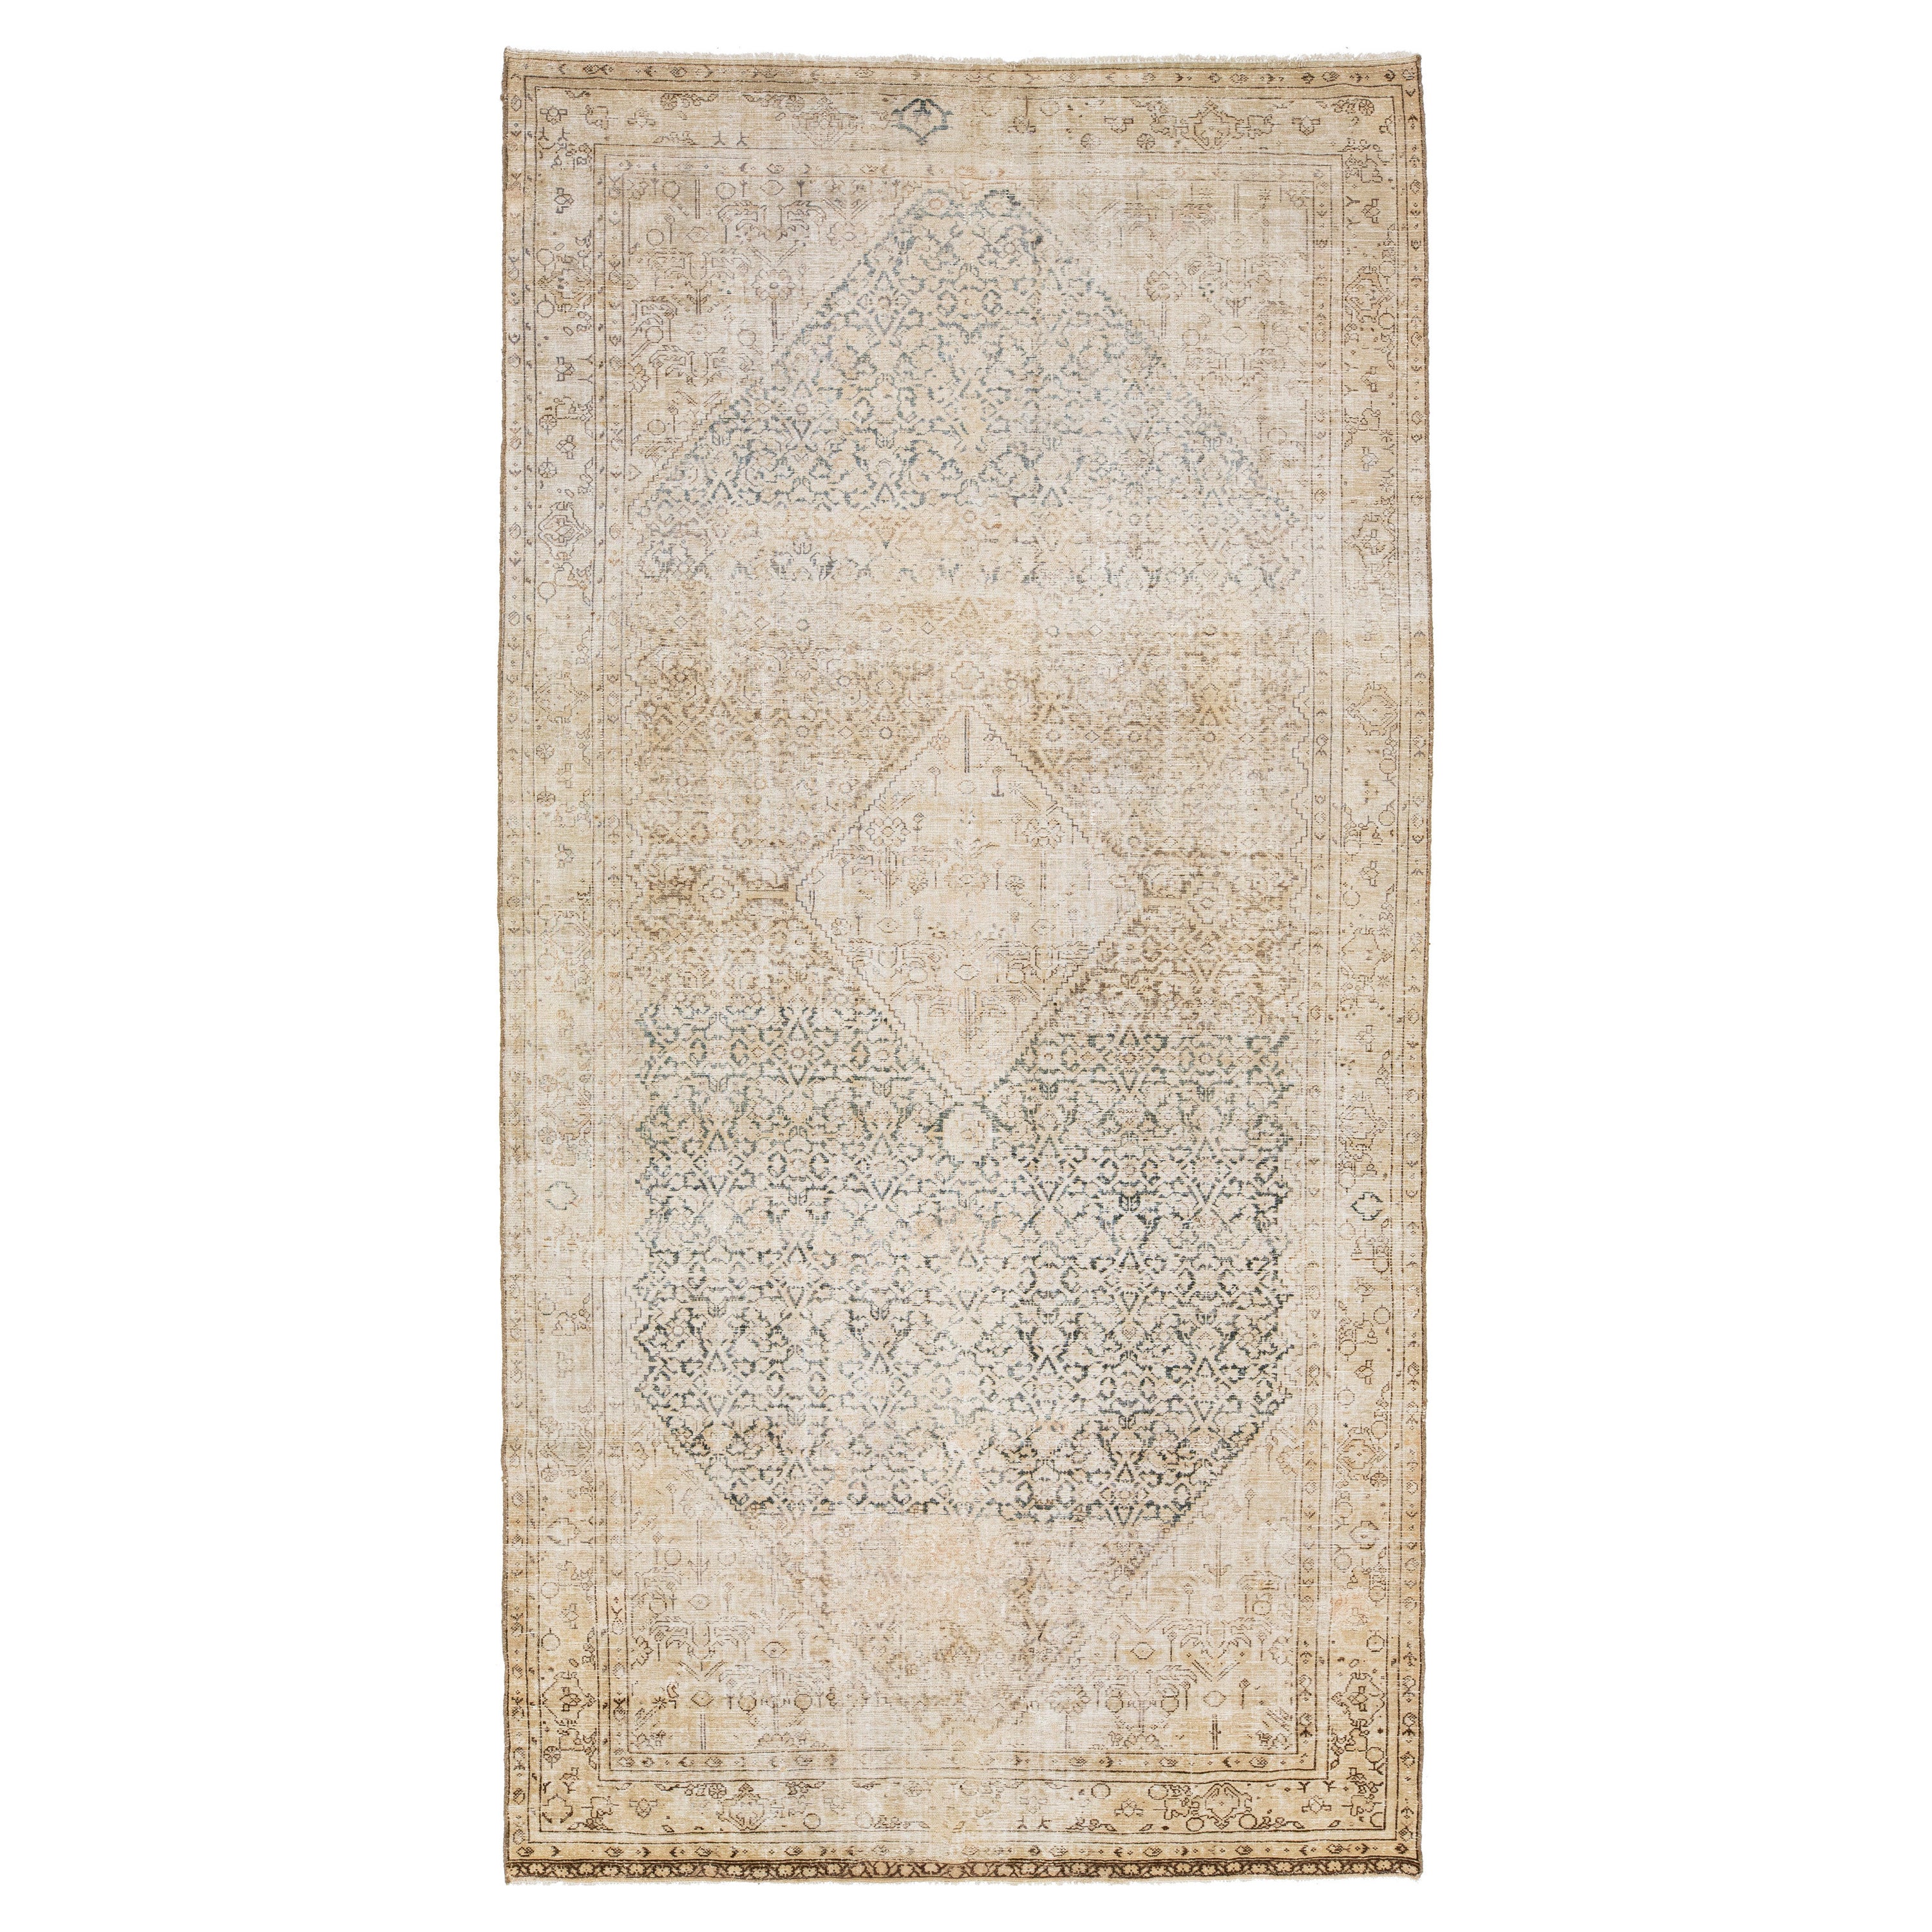  Beige Antique Malayer Persian Wool Rug With Center Design For Sale